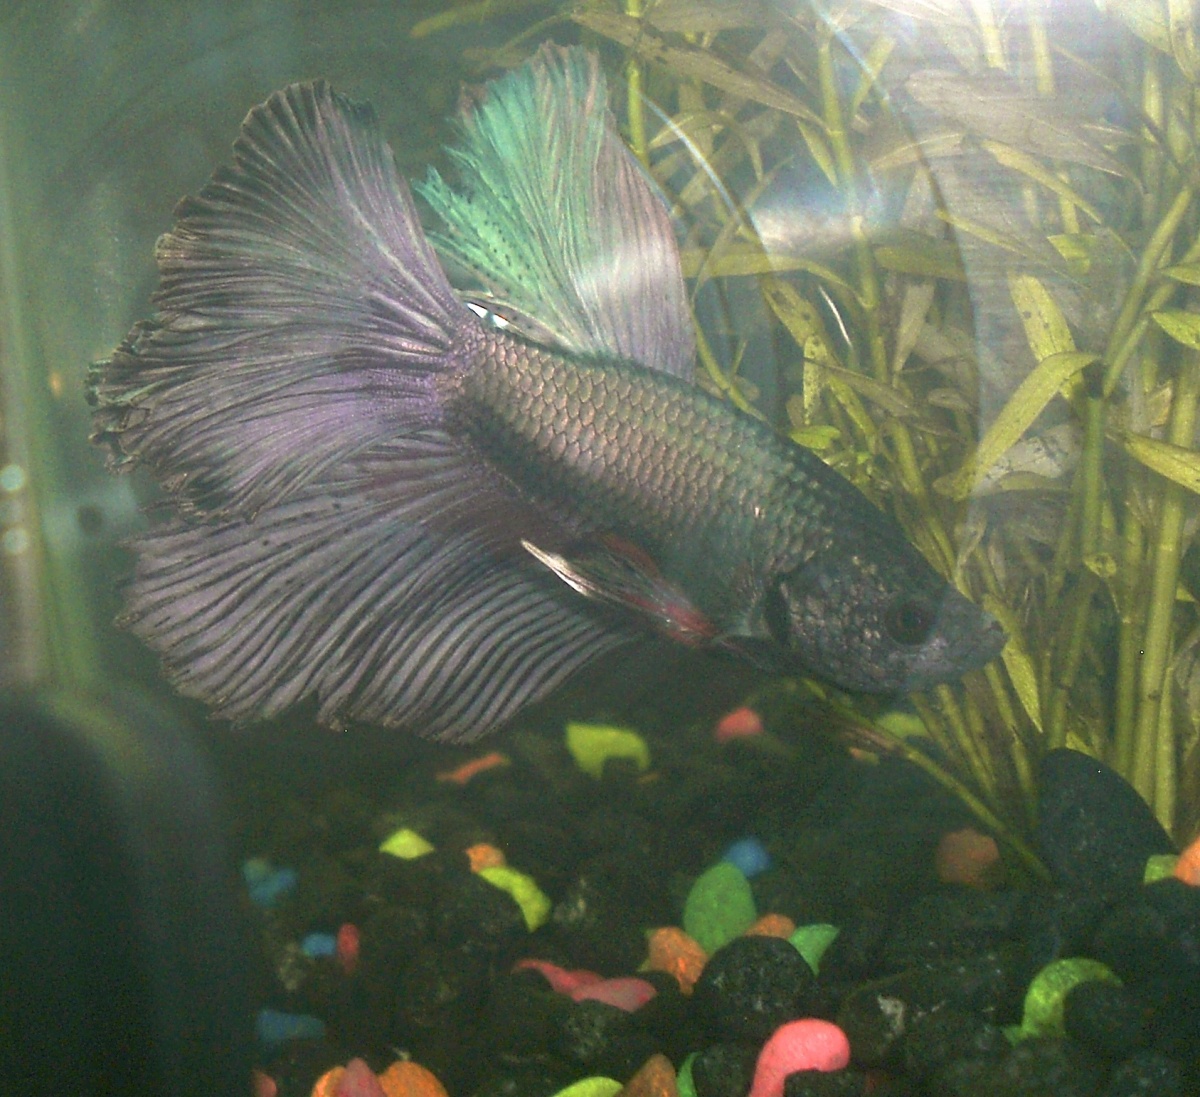 Sick boy after he arrives first day? just color looks off and his fin on left side is snarled, got damaged in transit or ill?